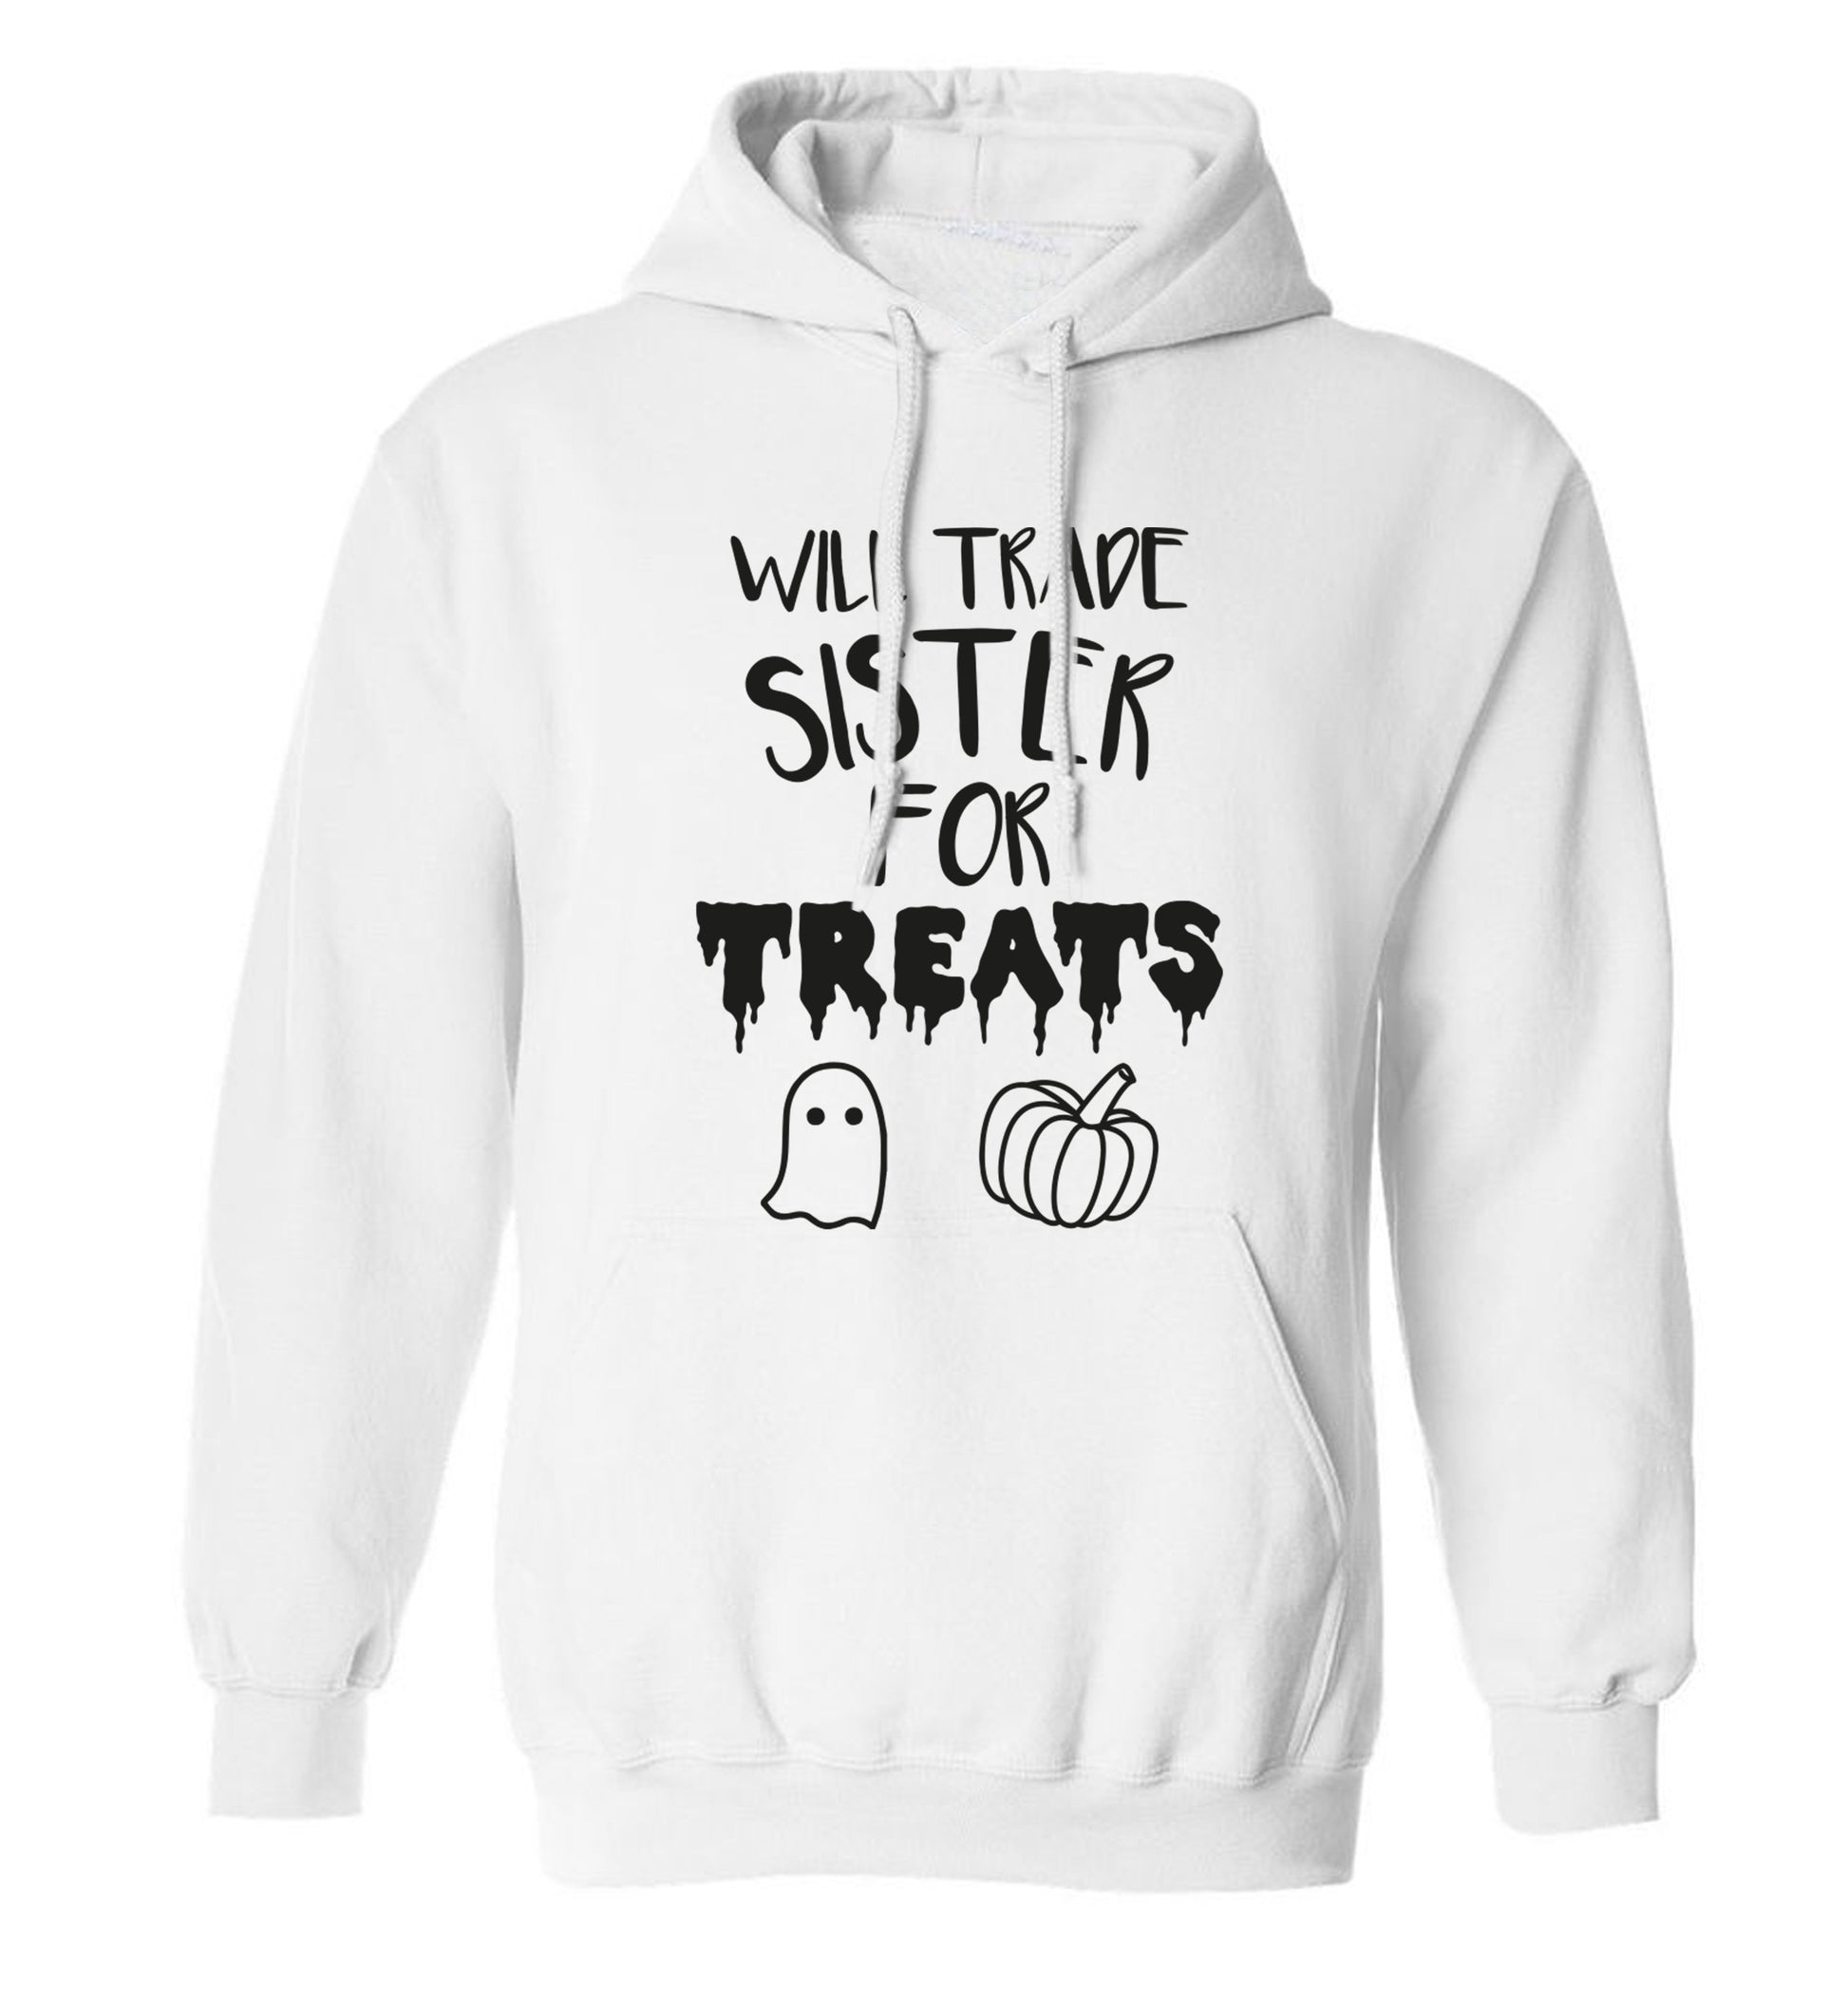 Will trade sister for treats adults unisex white hoodie 2XL